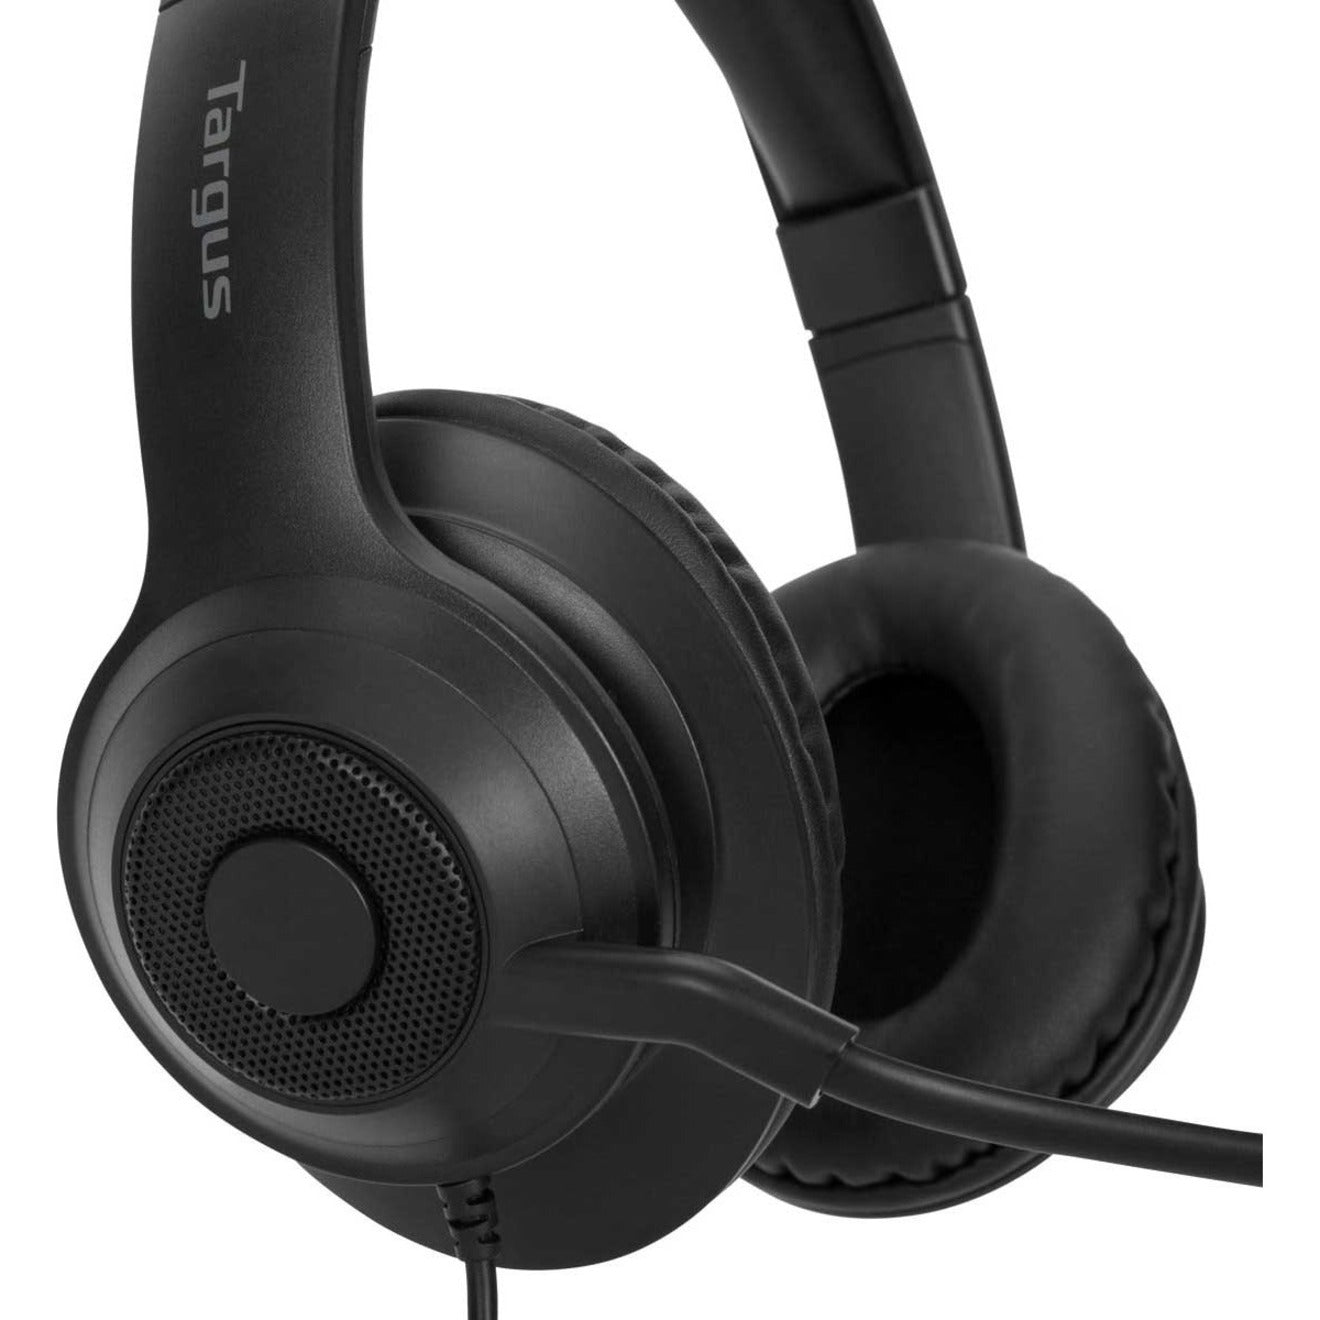 Targus AEH102TT Wired Stereo Headset, Binaural Over-the-ear, USB-A Connection, 2 Year Warranty